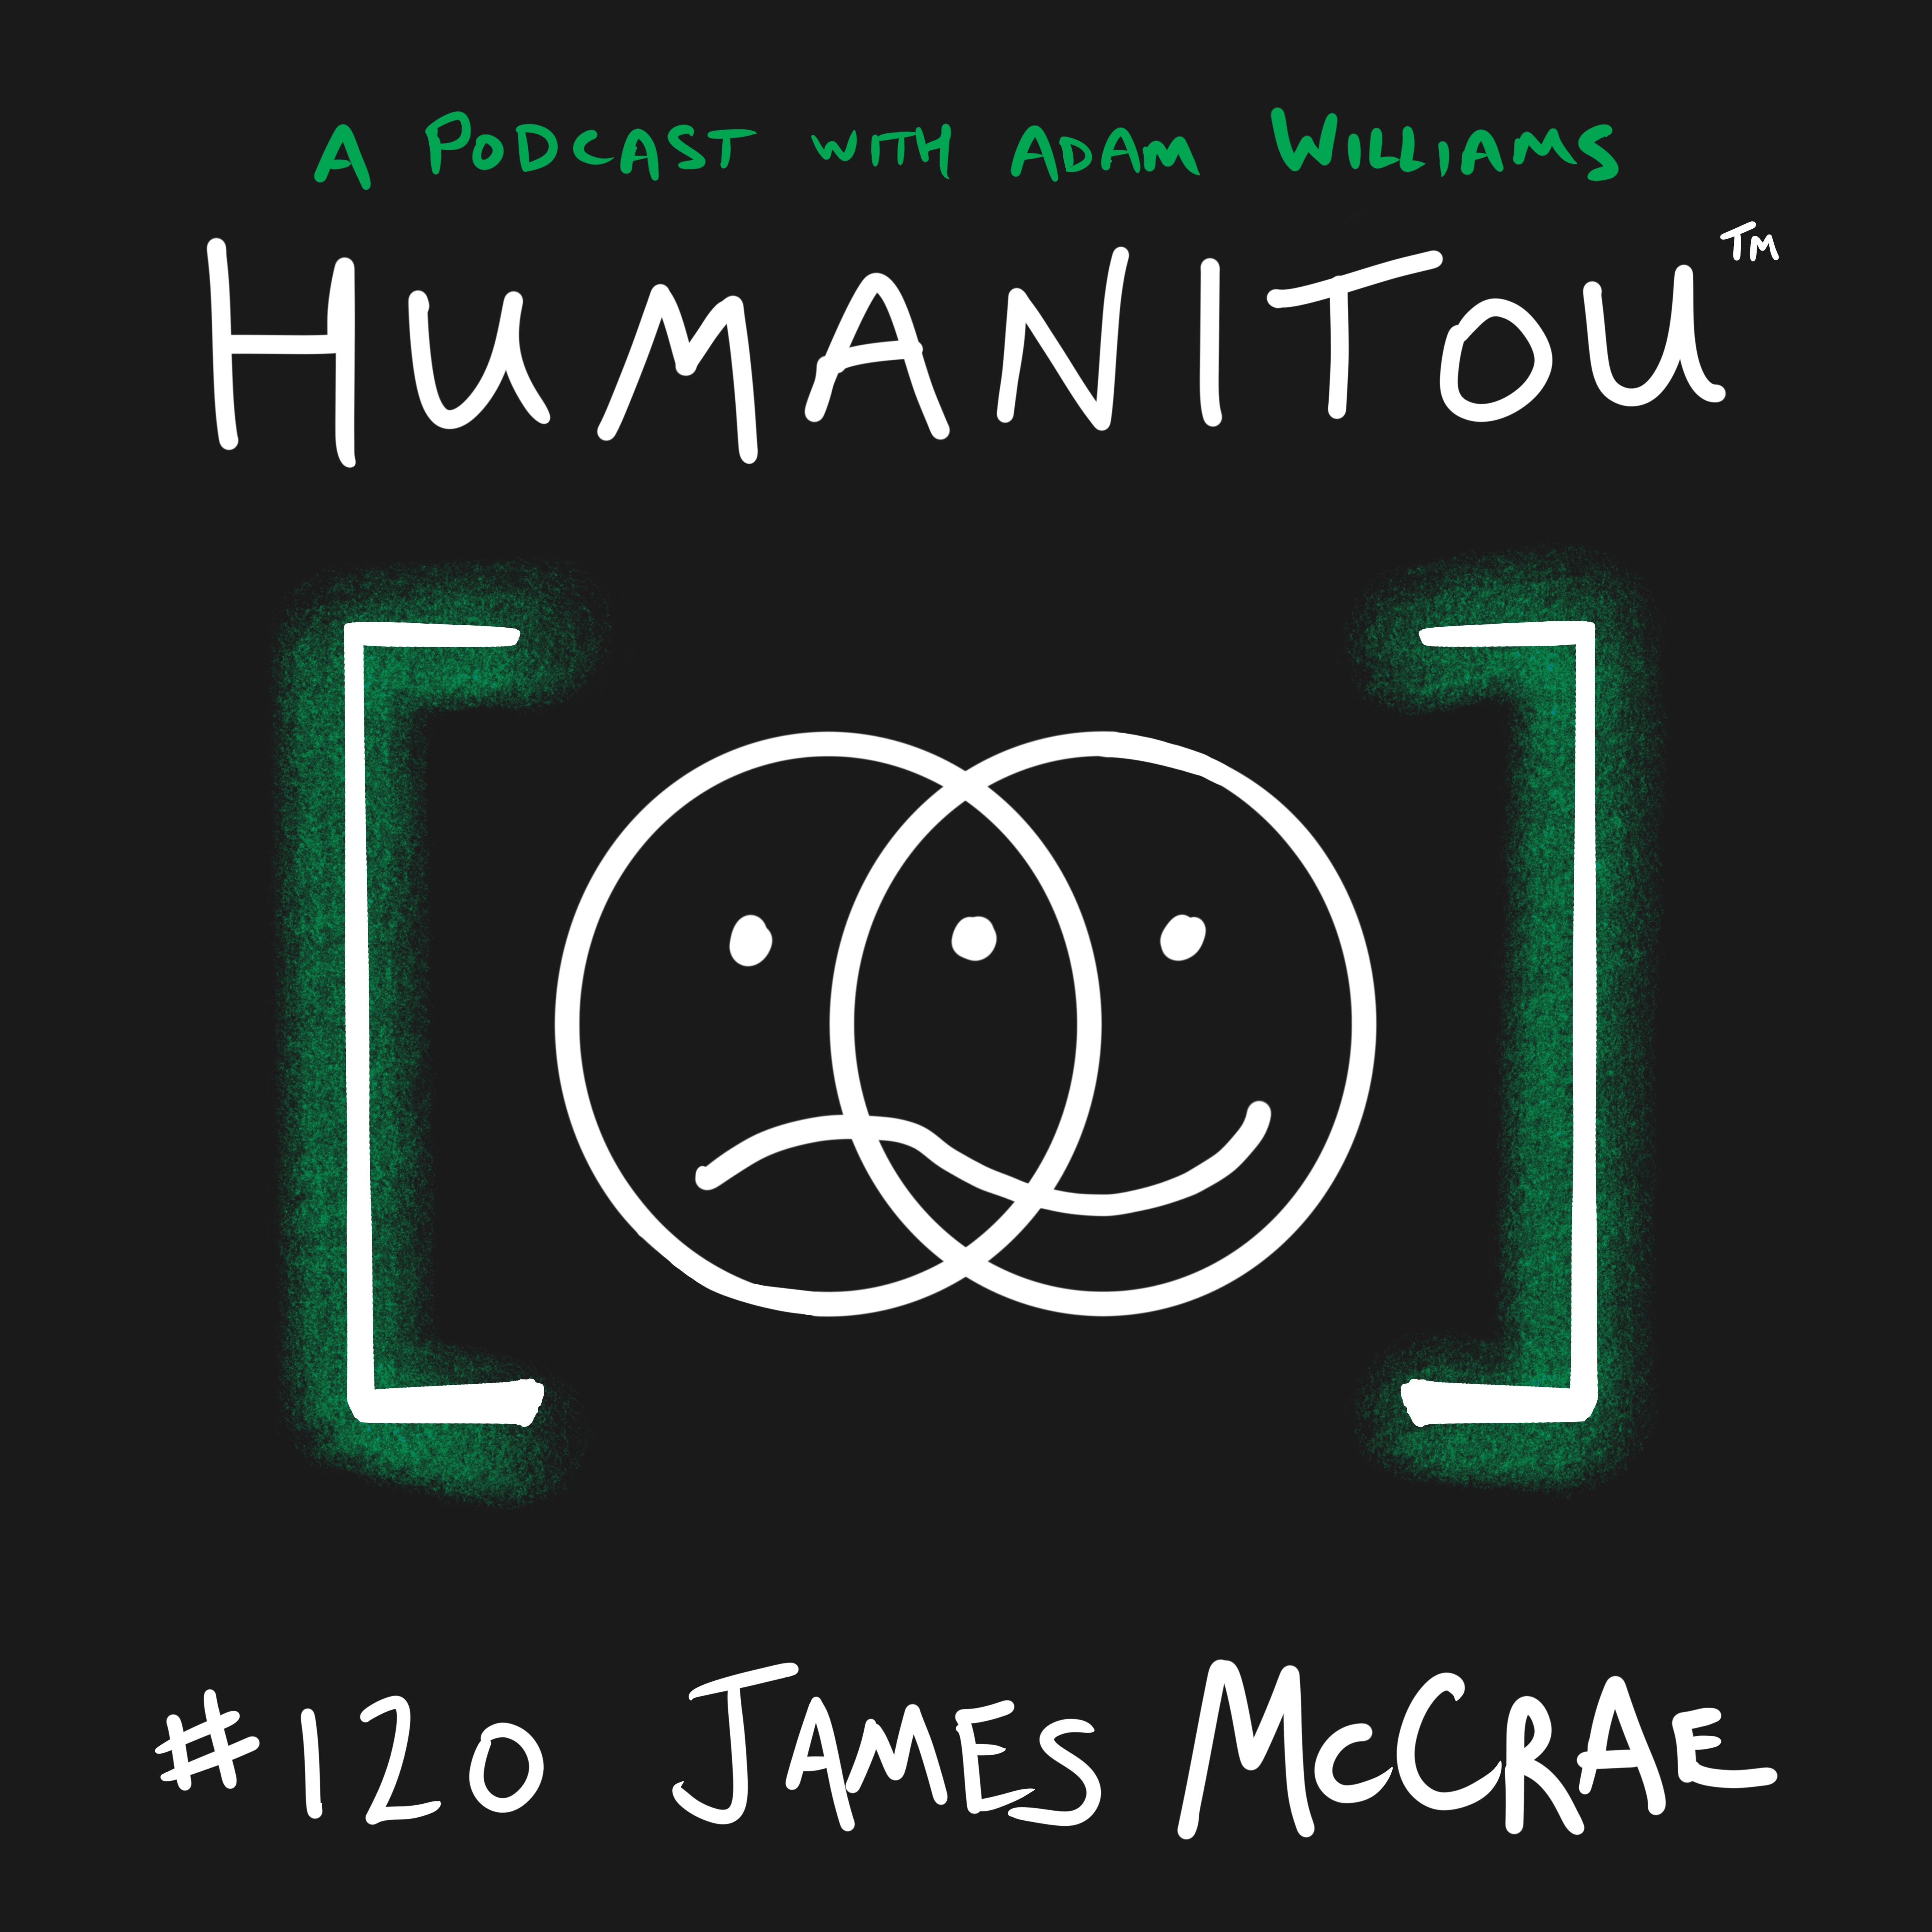 120: James McCrae, poet, meme artist and author of Sh#t Your Ego Says, on ayahuasca, karma and the art of our times